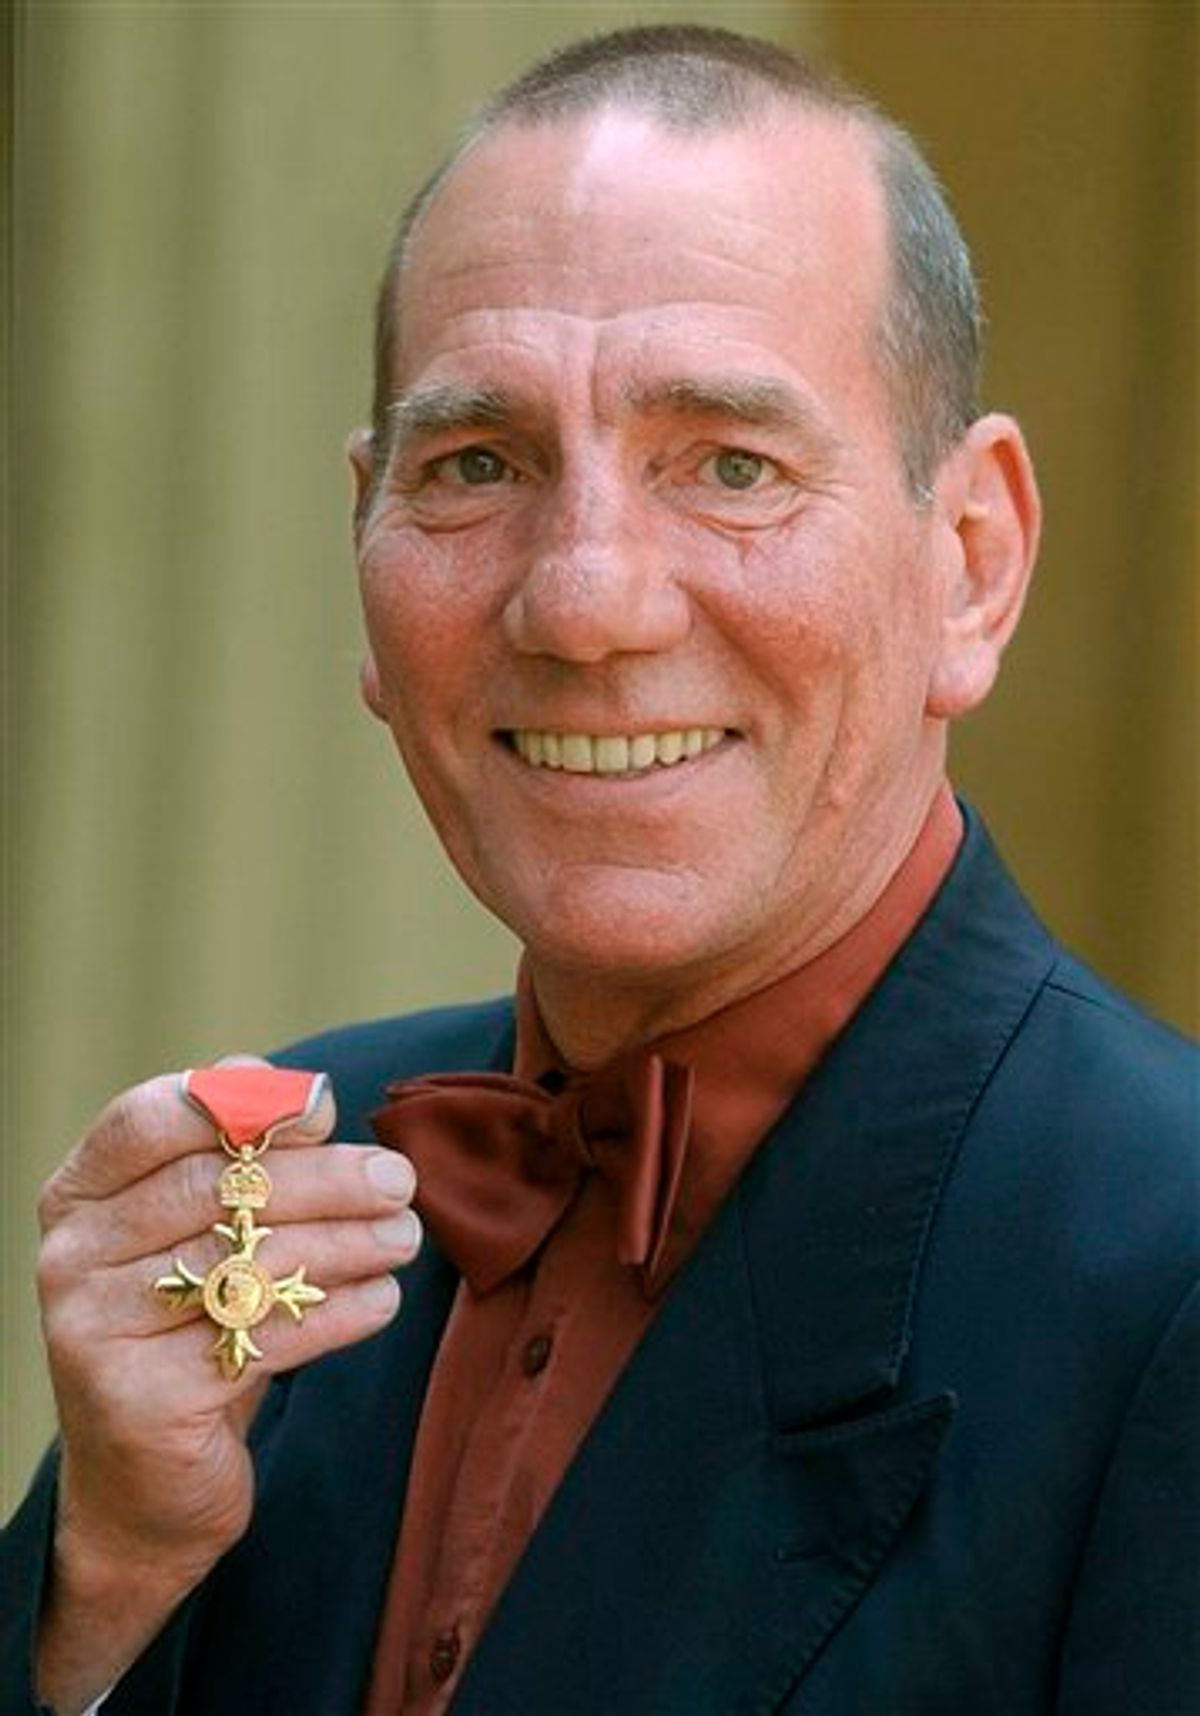 FILE -A Wednesday, June 9, 2004 photo from files showing  British actor Peter Postlethwaite displaying his Order of the British Empire or OBE, shortly after the presentation at Buckingham Palace in London.  Britain's Press Association is reporting Monday, Jan. 3, 2011 that decorated film actor Pete Postlethwaite has died at the age of 64. It quotes longtime friend Andrew Richardson as saying Monday that Postlethwaite died in hospital in Shropshire, central England, after a long illness. Richardson said Postlethwaite died Sunday. He had been receiving treatment for cancer.  (AP Photo /Kirsty Wigglesworth/ Pool) (AP)